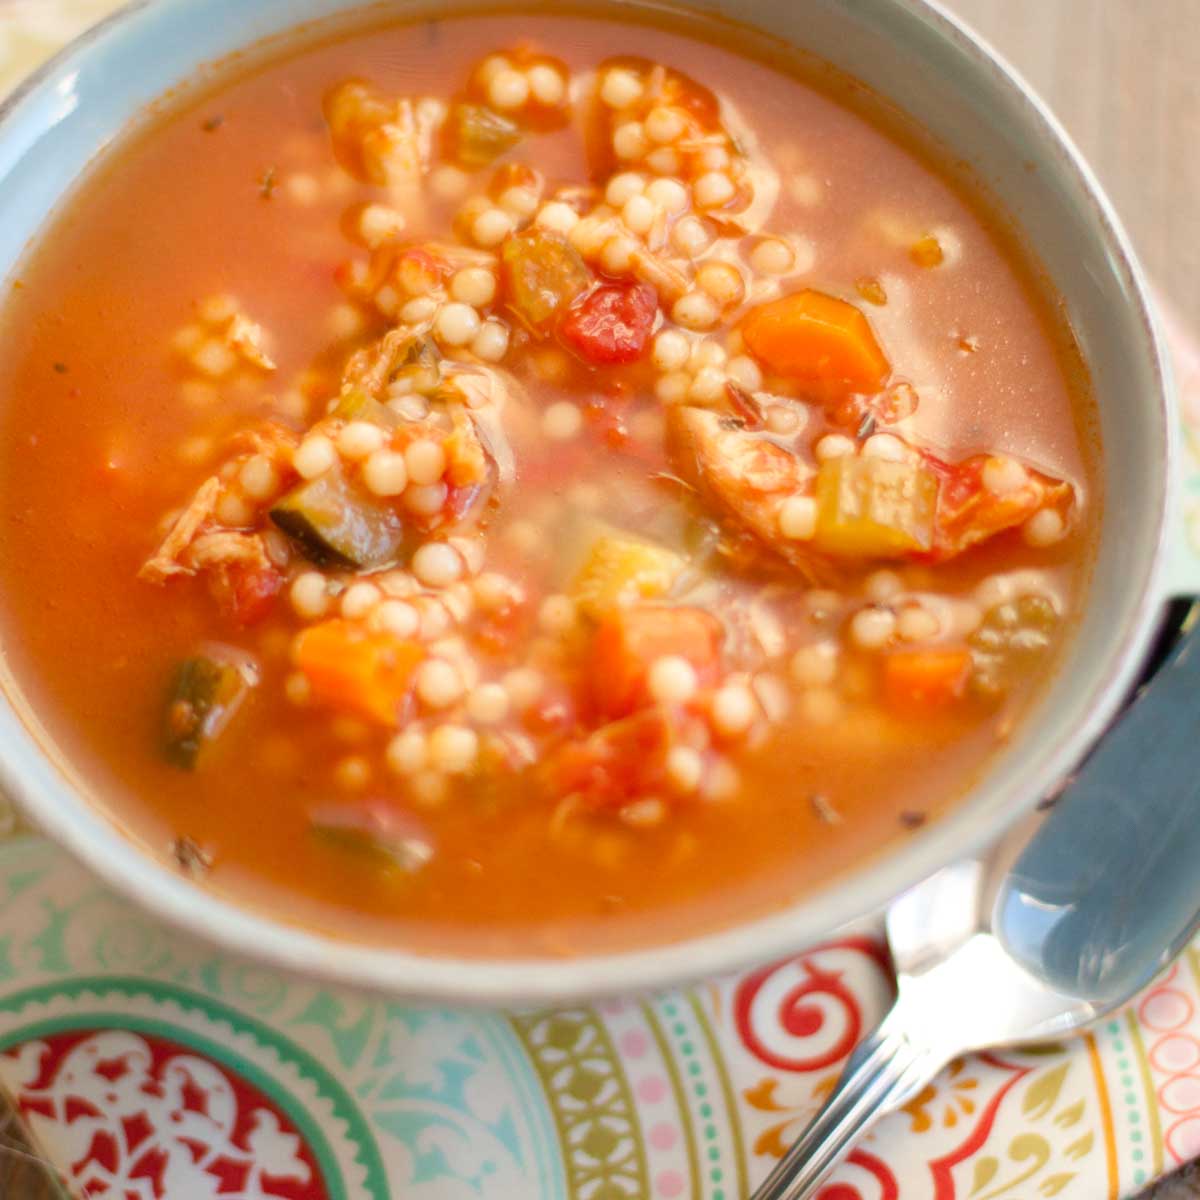 VEGETABLE BARLEY SOUP - The clever meal